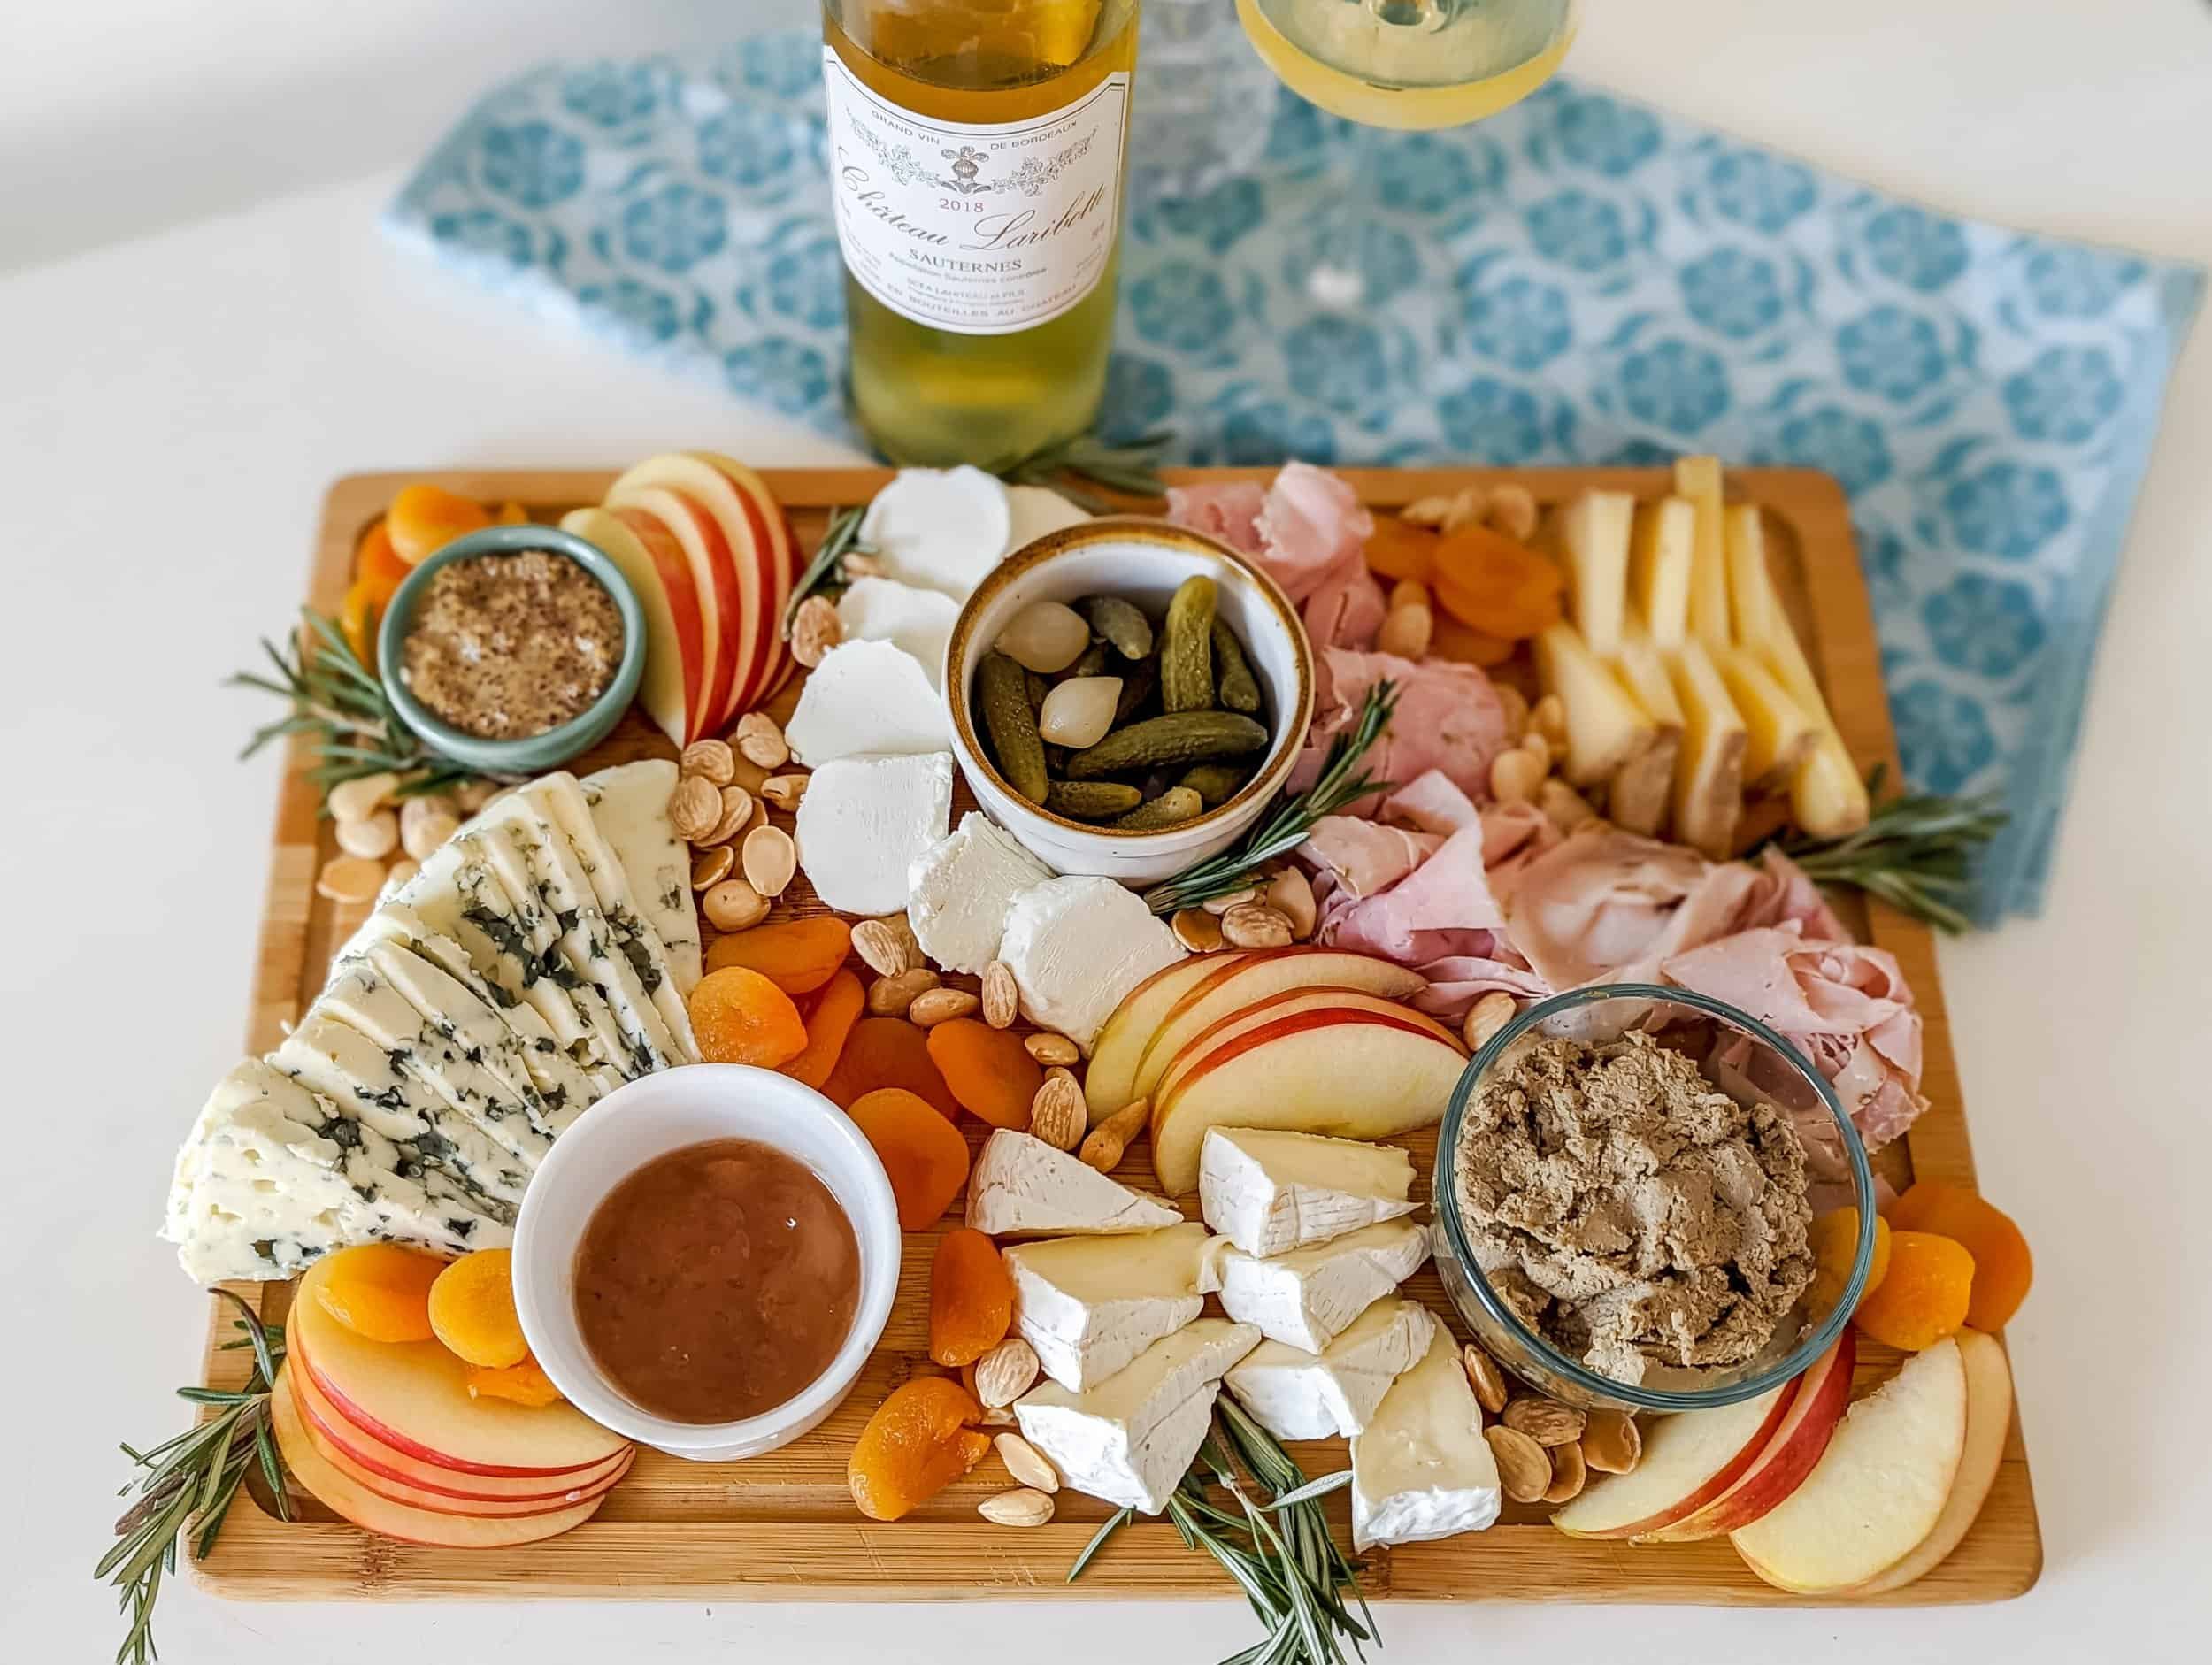 The Best Wine with a Charcuterie Board (According to an Expert